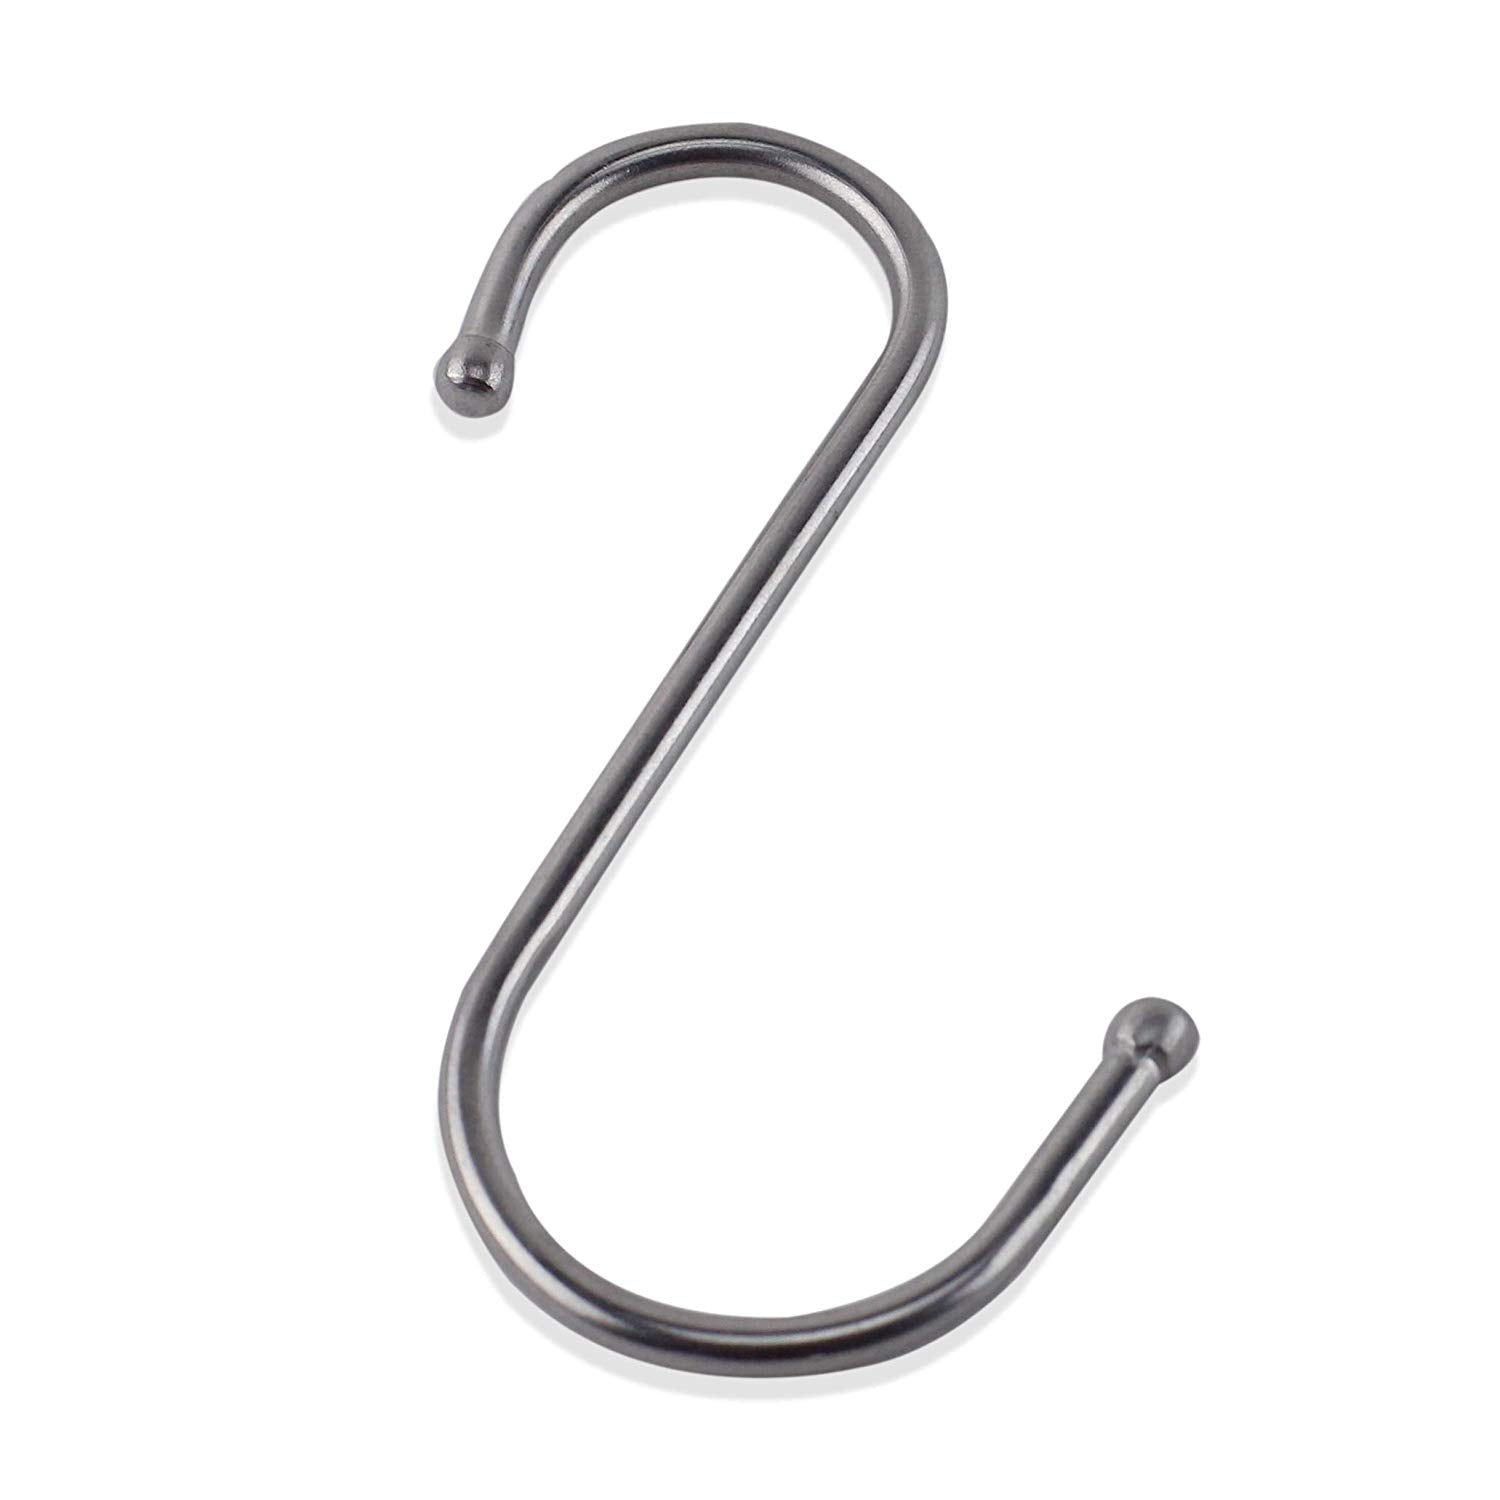 Pack of 50 Double Ball End 3.5 Inches S Shape Chrome Finish Stainless Steel Hanging Hooks for Kitchenware, Pots, Utensils, Plants, Towels, Gardening Tools, Clothes by Rack and Hook (50)